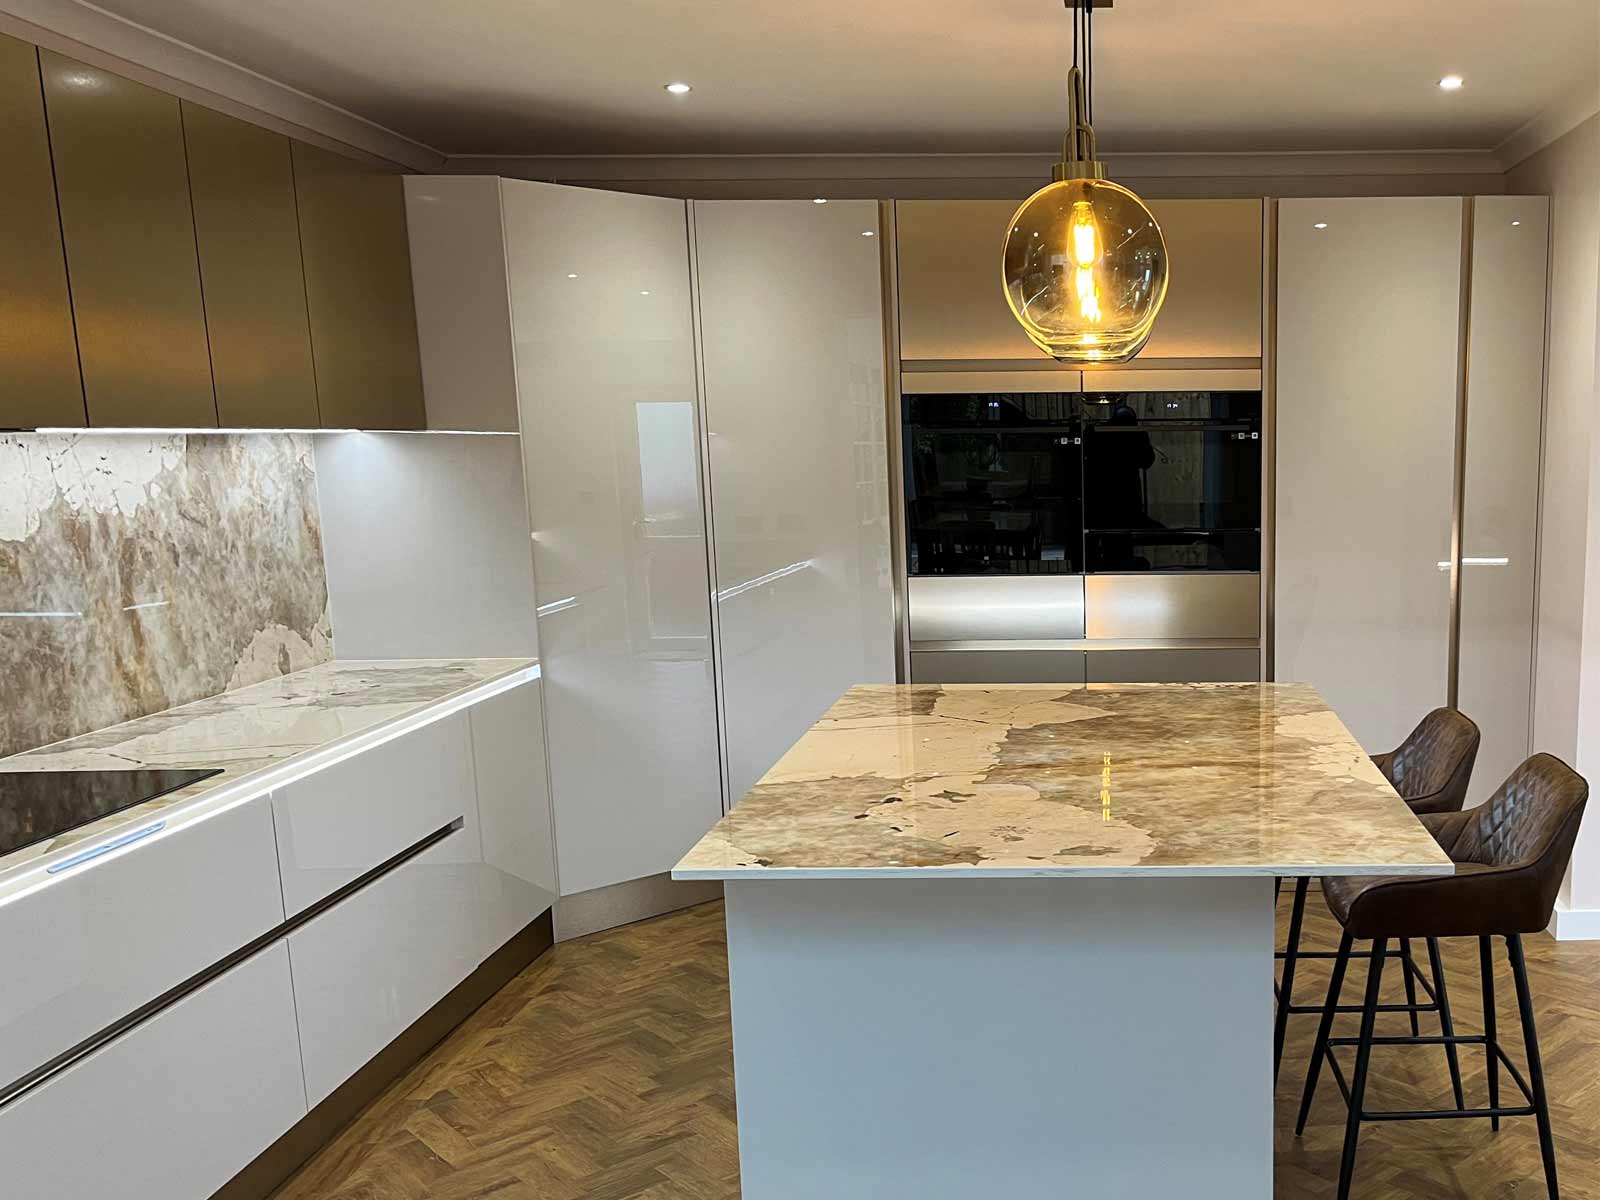 A cashmere-style kitchen with handleless doors and a stone splashback